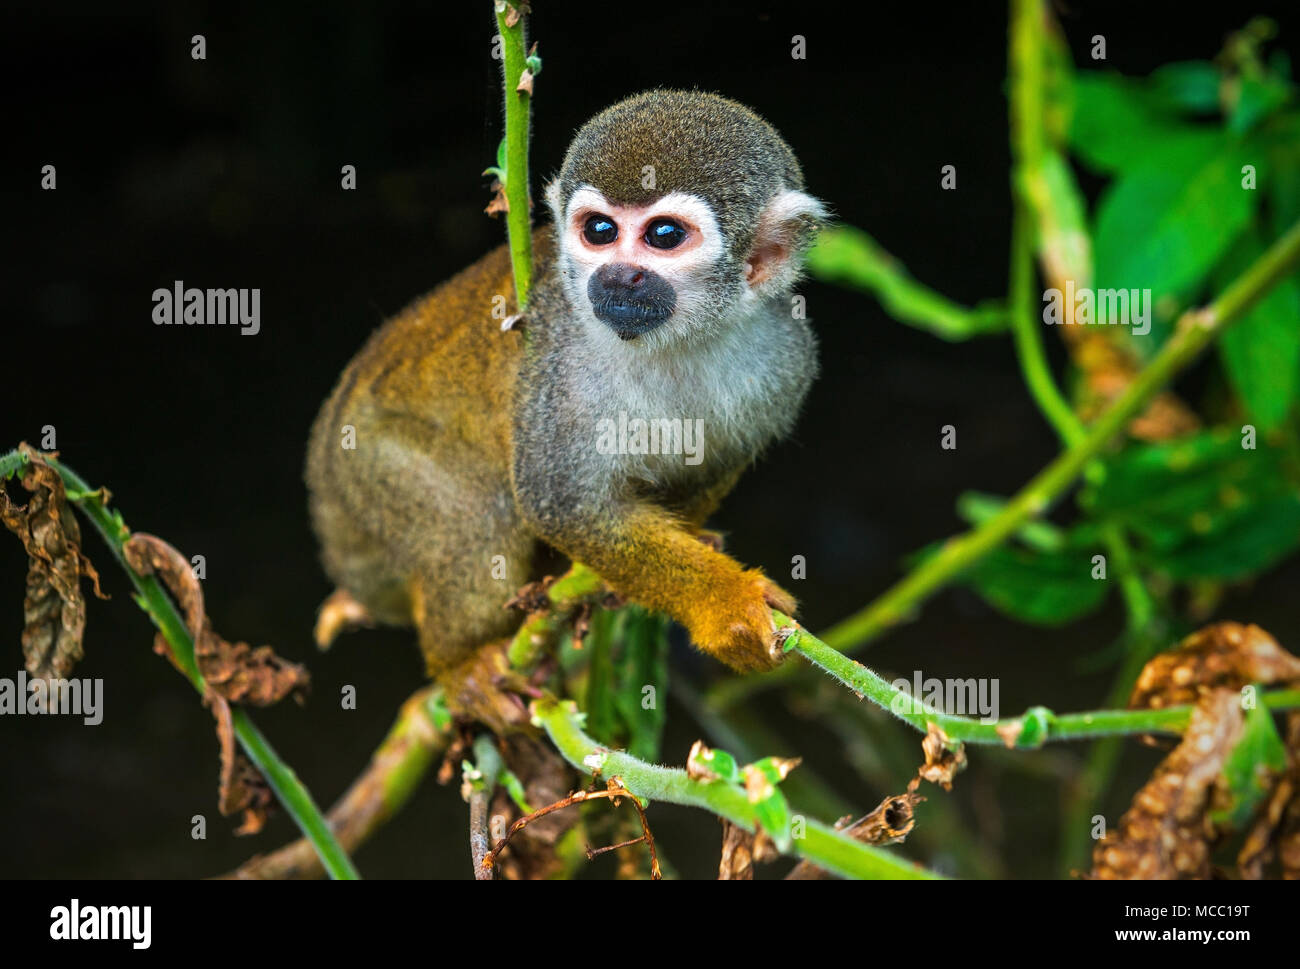 Portrait of a Squirrel Monkey (Saimiri) in the tropical rainforest of the Amazon river basin inside the Cuyabeno Wildlife Reserve in Ecuador. Stock Photo